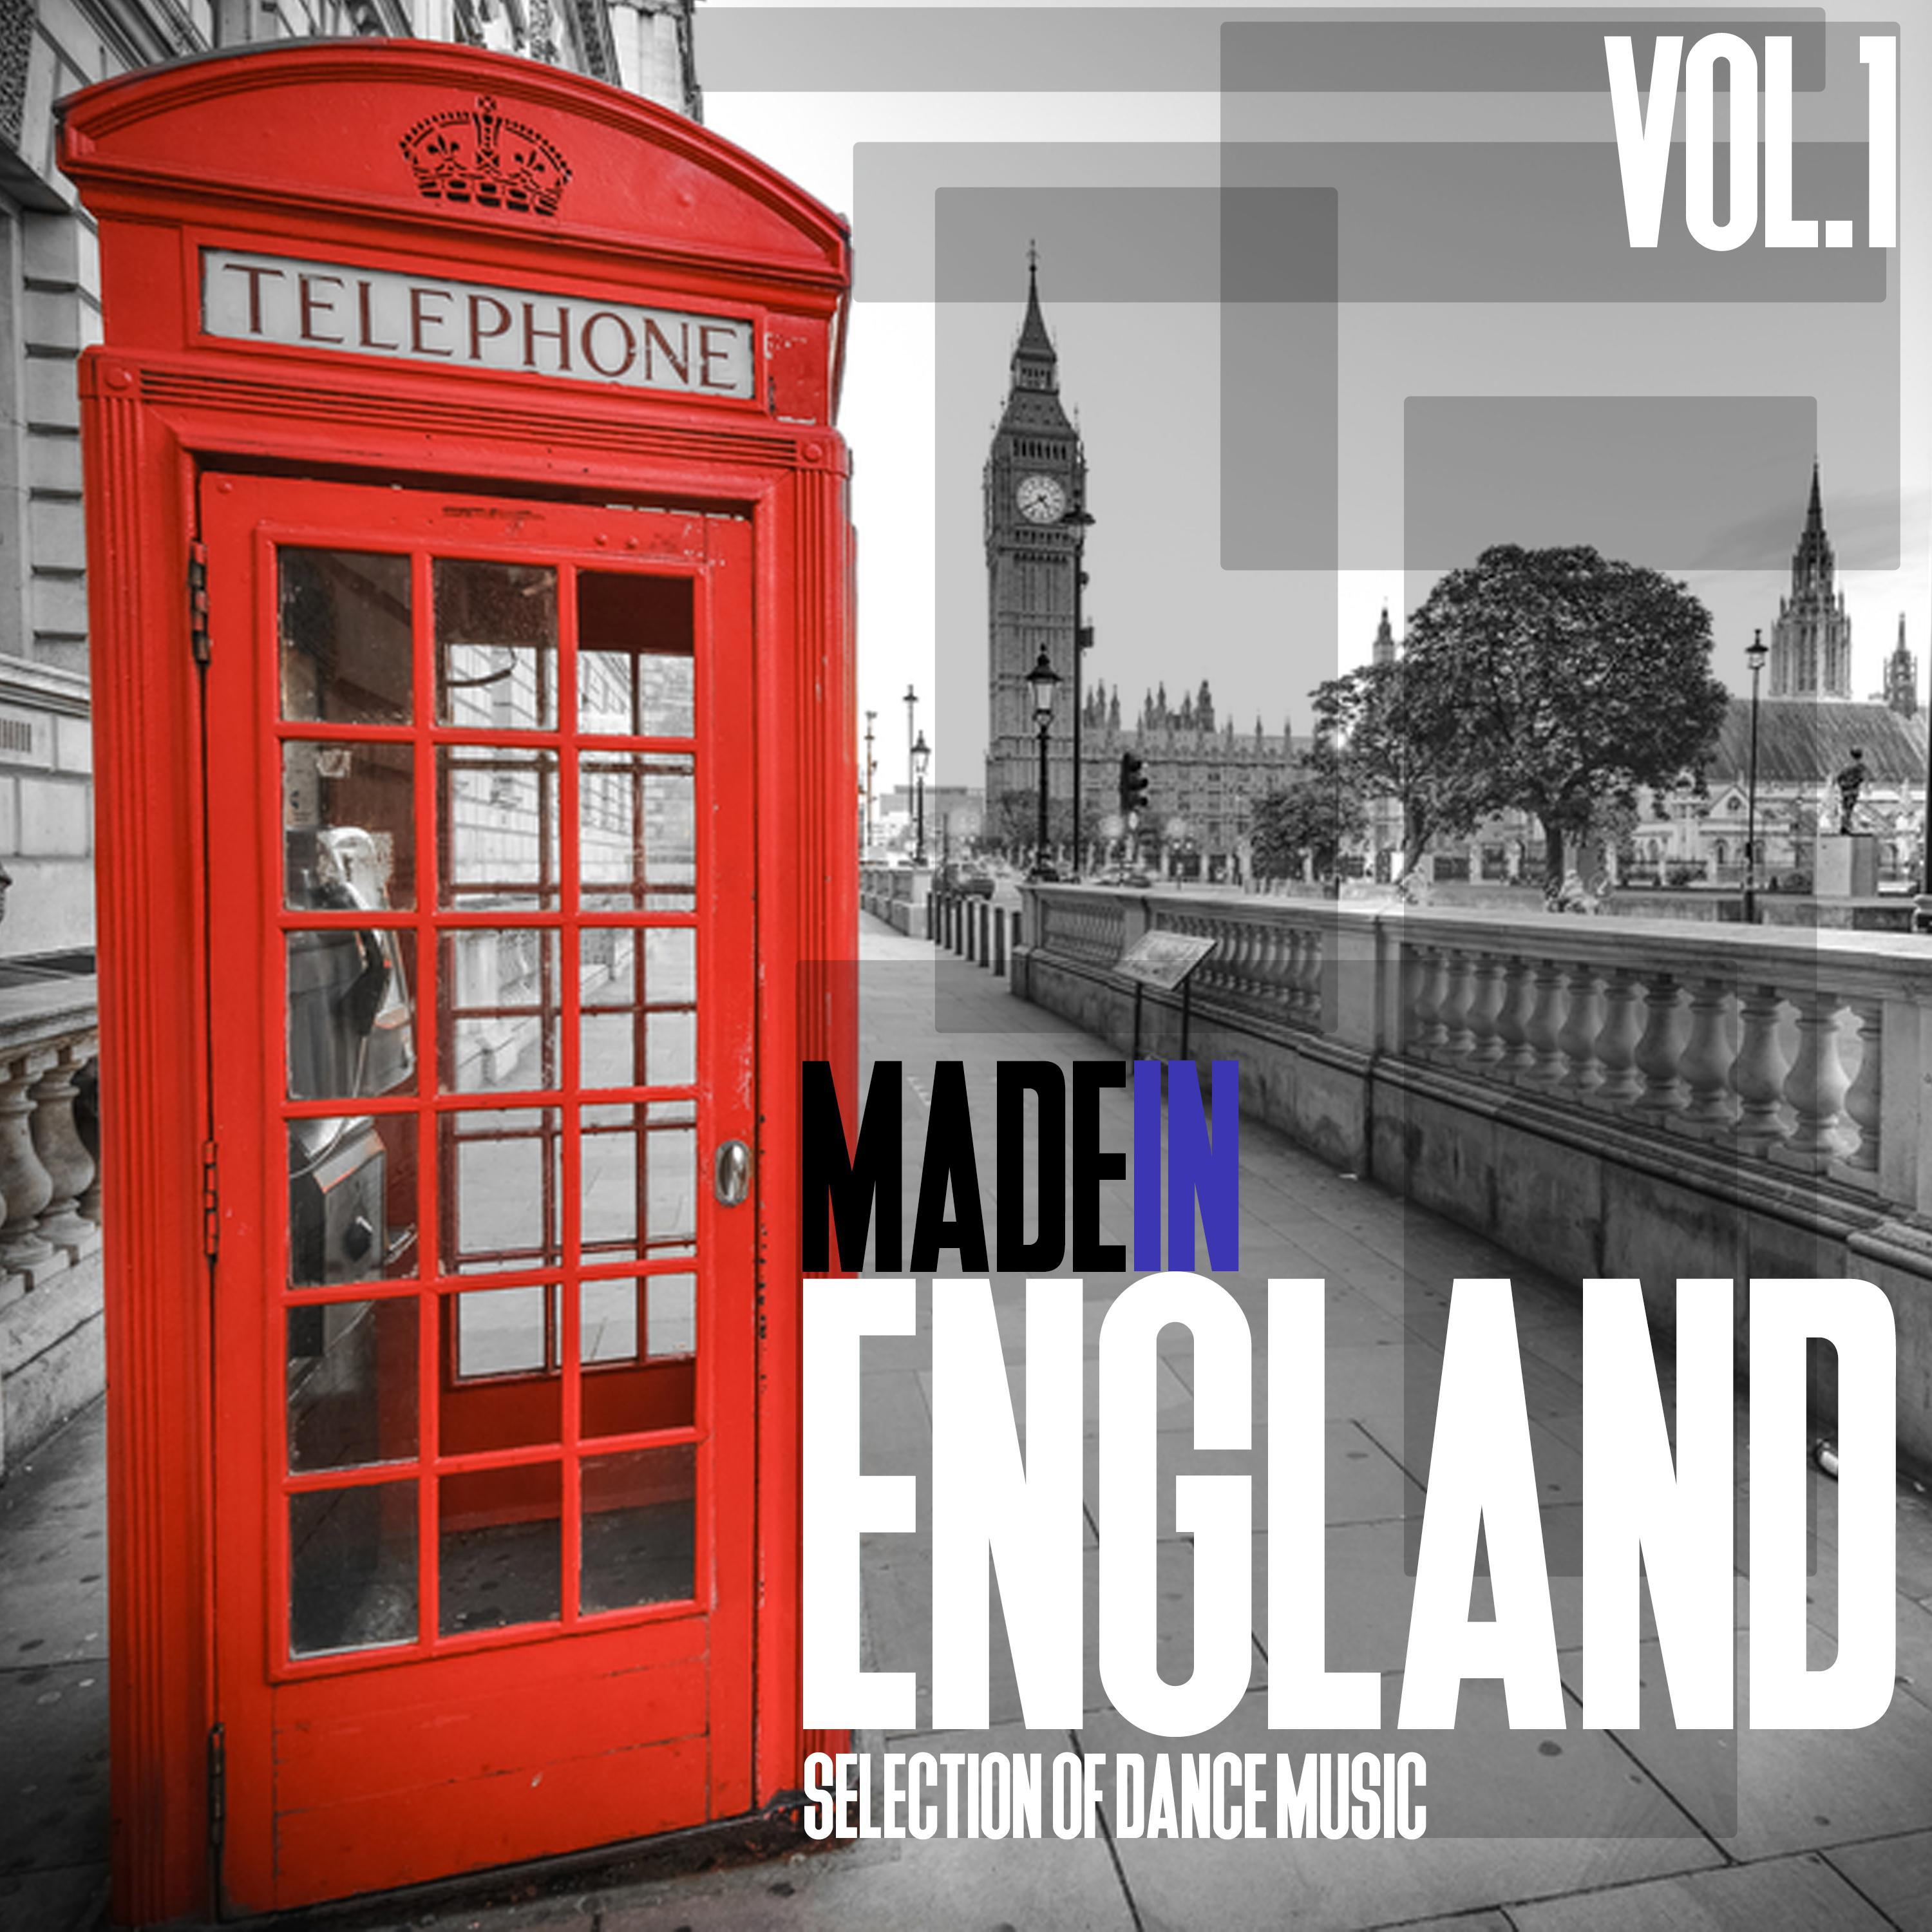 Made in England, Vol. 1 - Selection of Dance Music